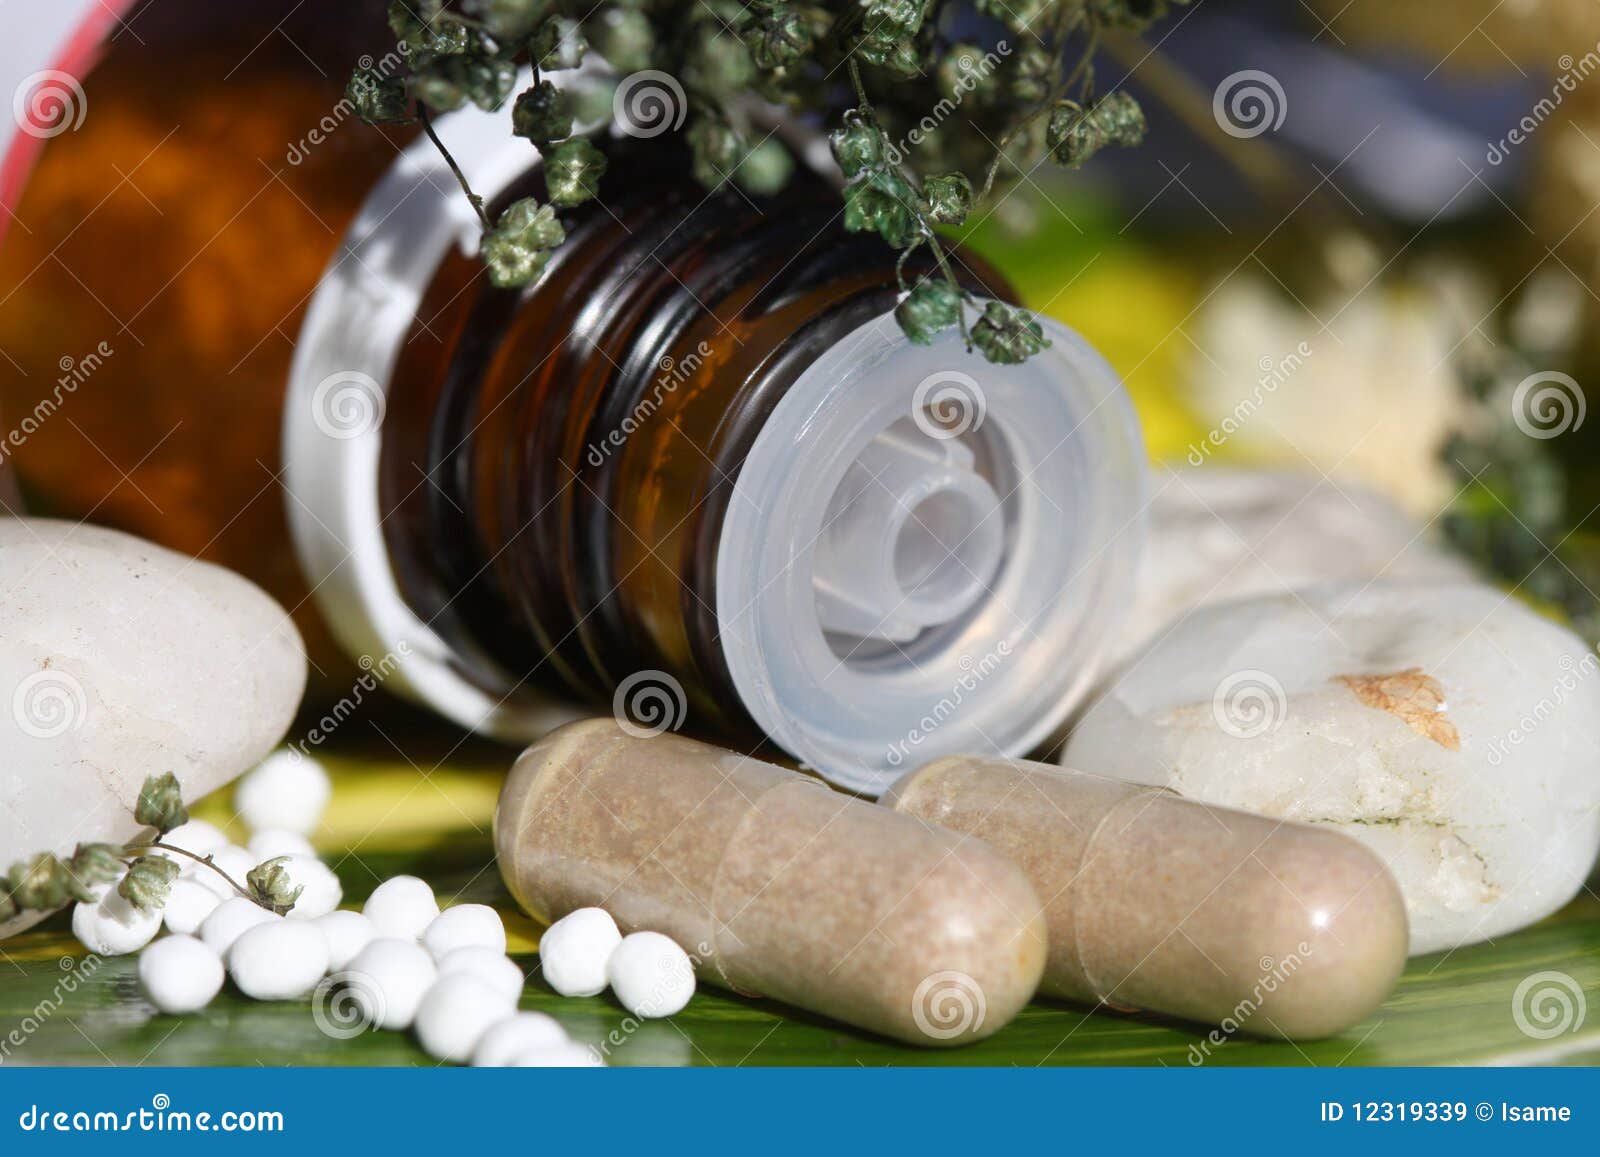 homeopathic pills over a green leaf